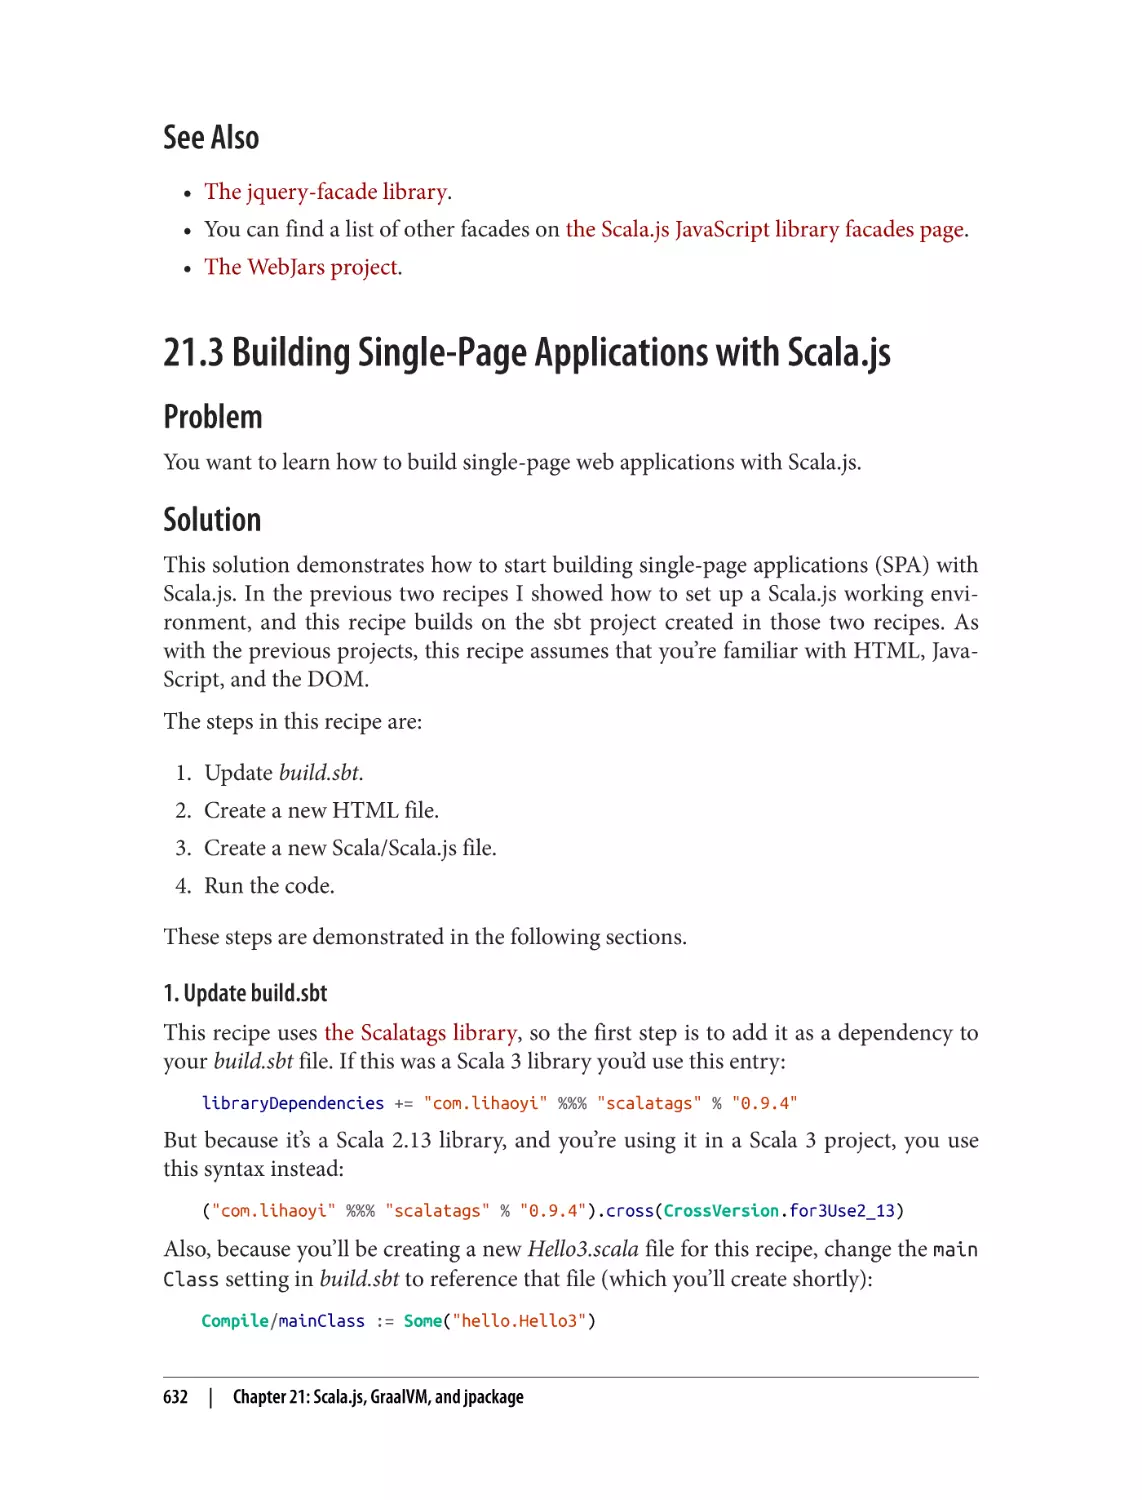 See Also
21.3 Building Single-Page Applications with Scala.js
Problem
Solution